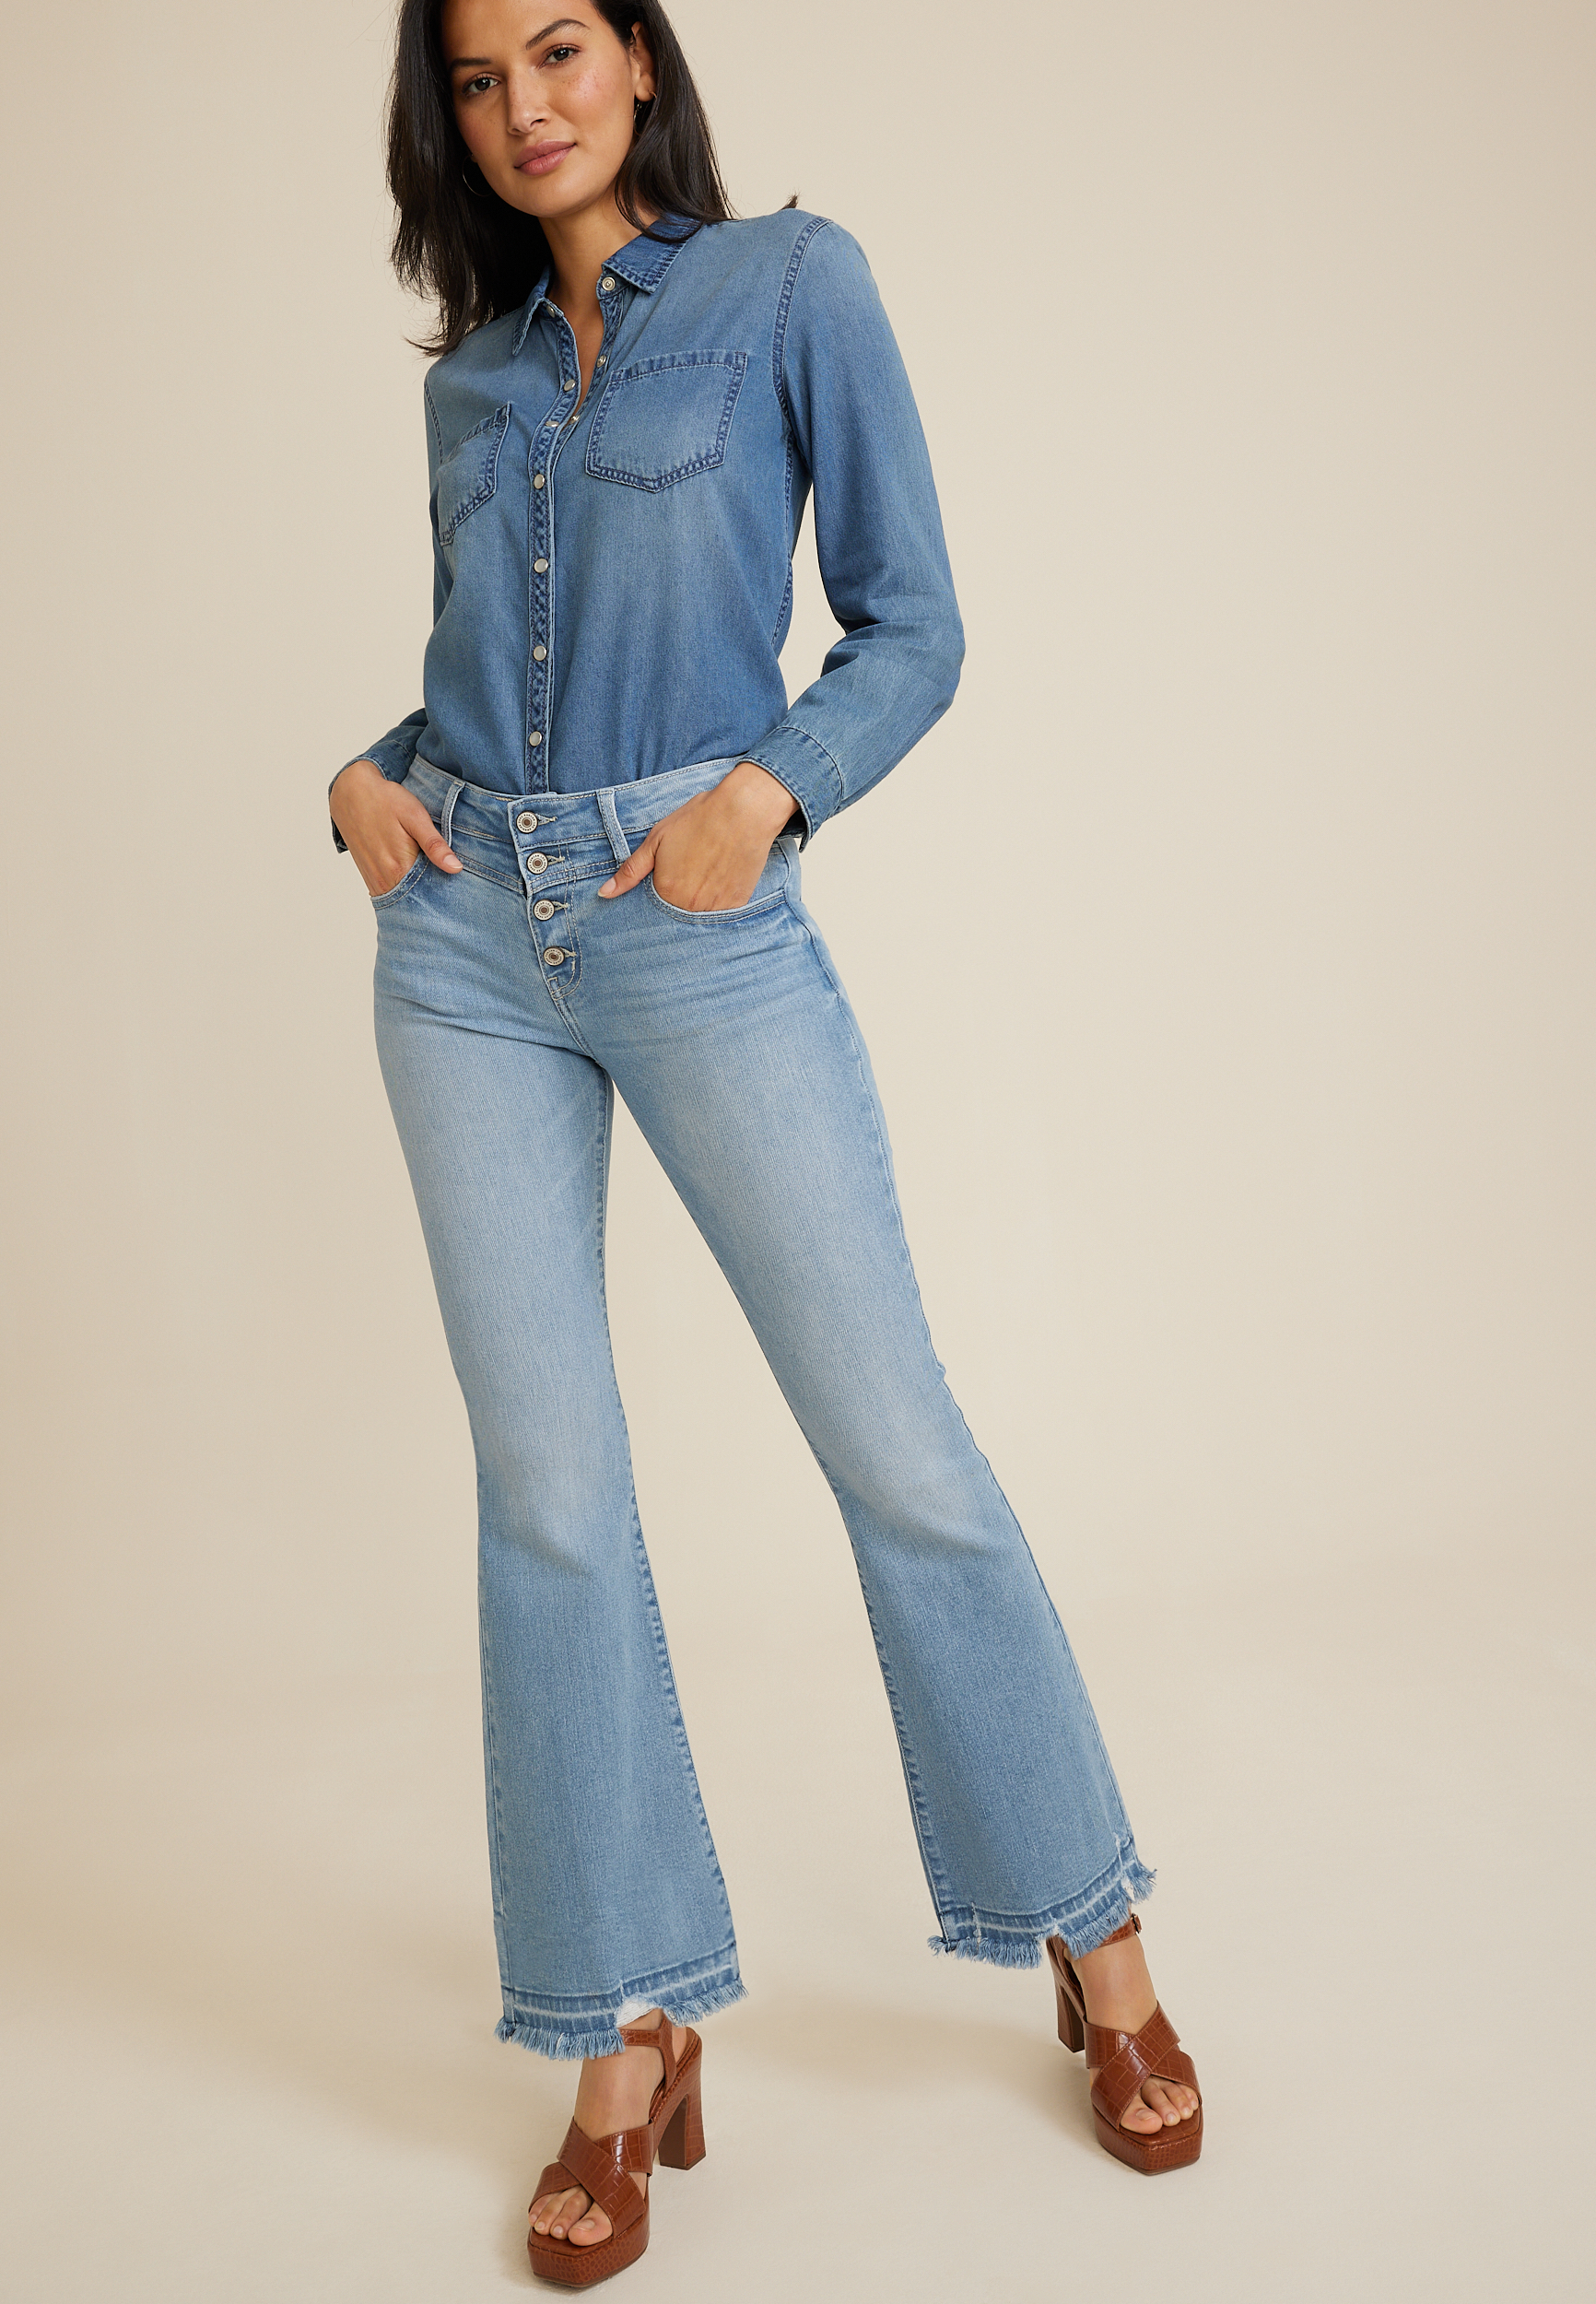 KanCan™ High Rise Release Frayed Hem Button Fly Flare Jean | maurices